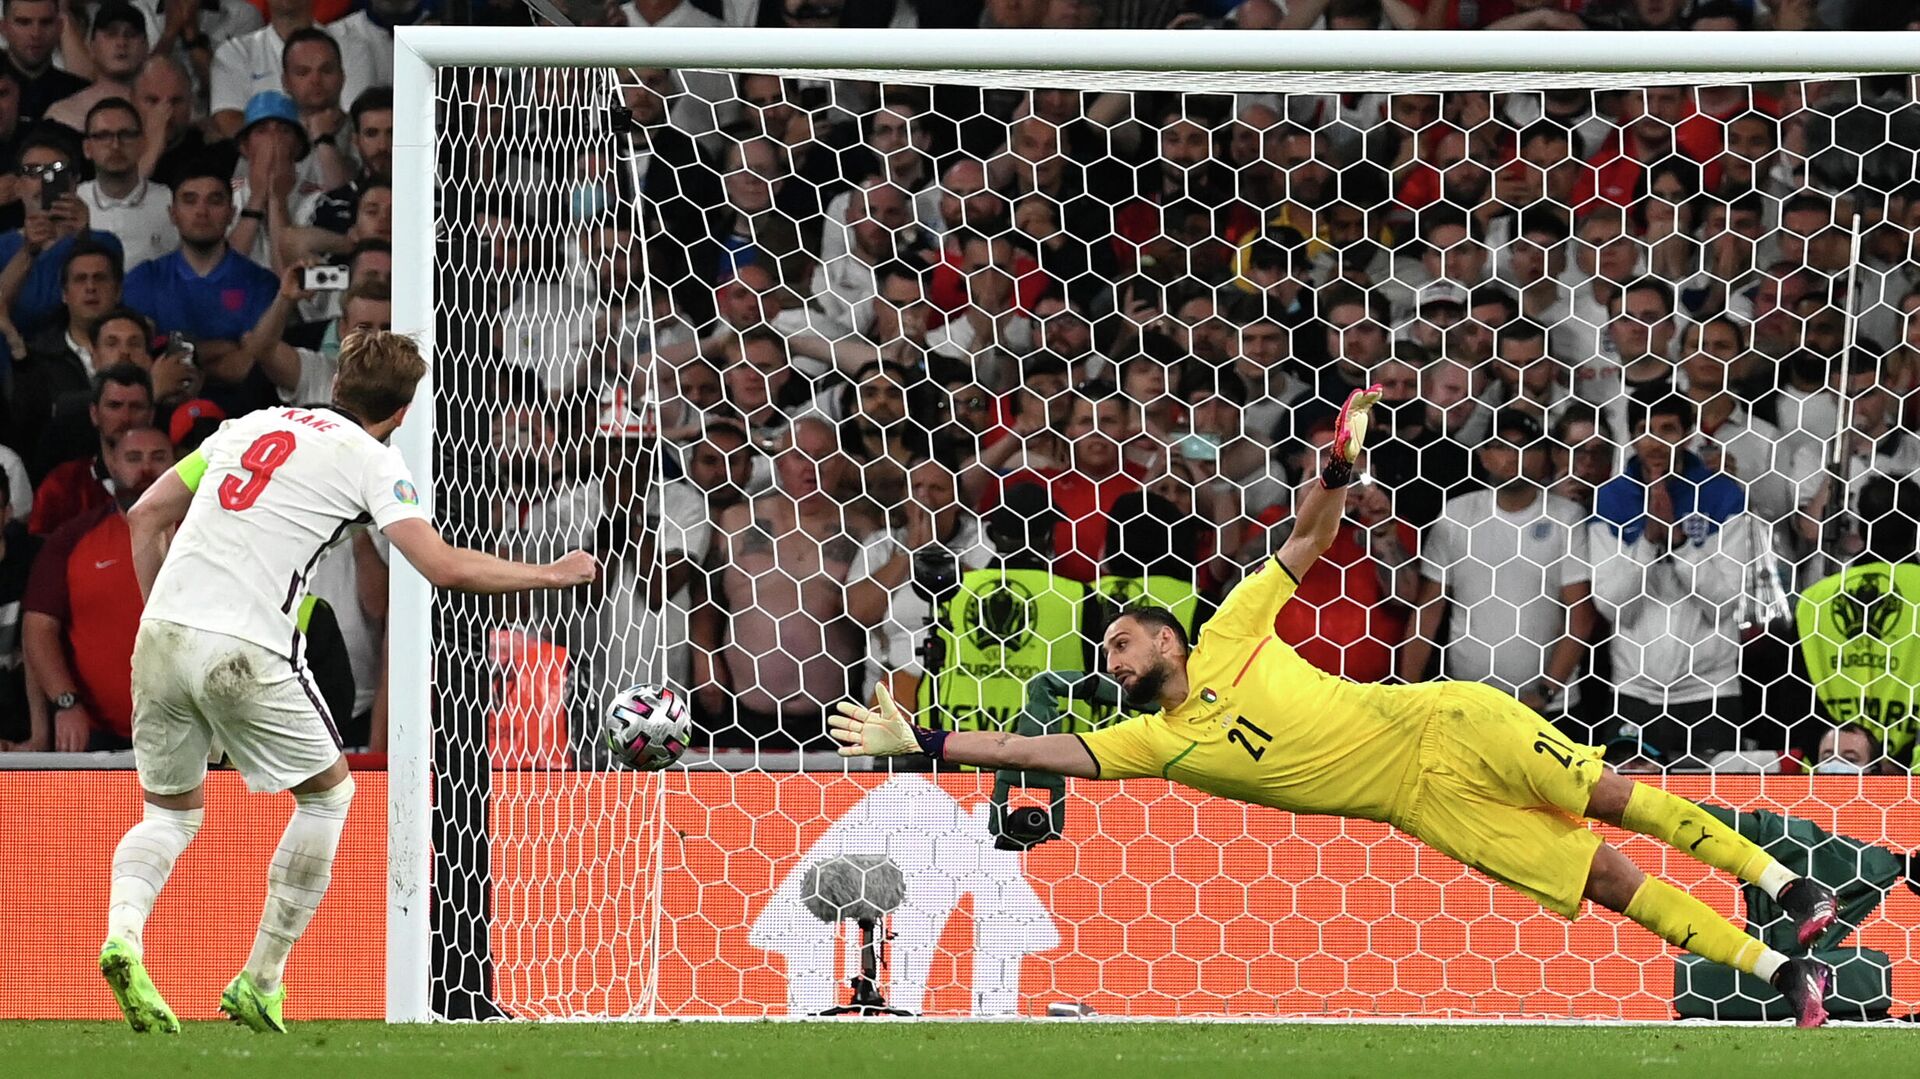 England's Harry Kanem left, shoots to score past Italy's goalkeeper Gianluigi Donnarumma during penalty shootout of the Euro 2020 soccer championship final match between England and Italy at Wembley Stadium in London, Sunday, July 11, 2021 - Sputnik International, 1920, 07.10.2021